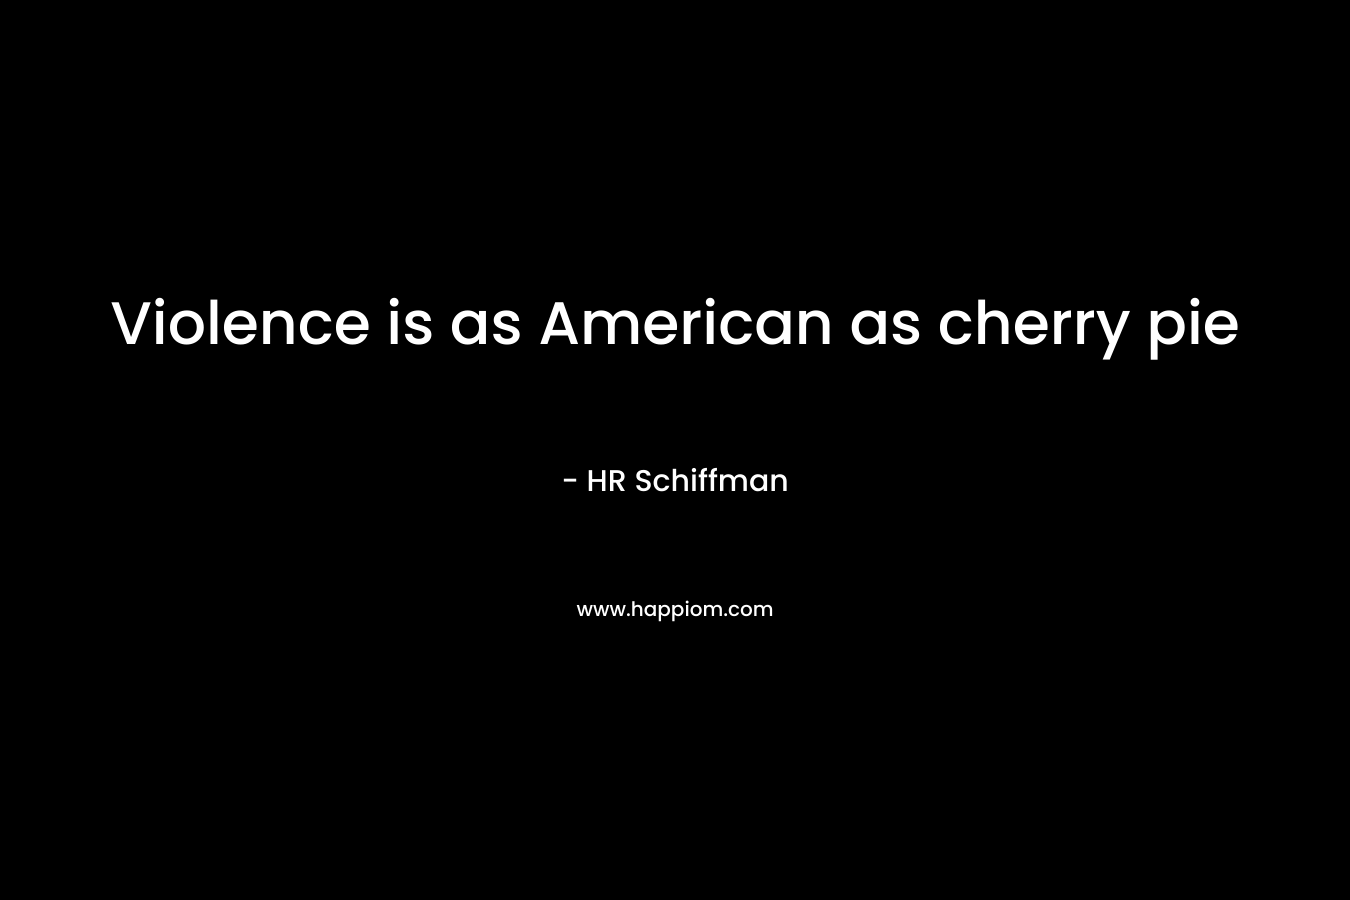 Violence is as American as cherry pie